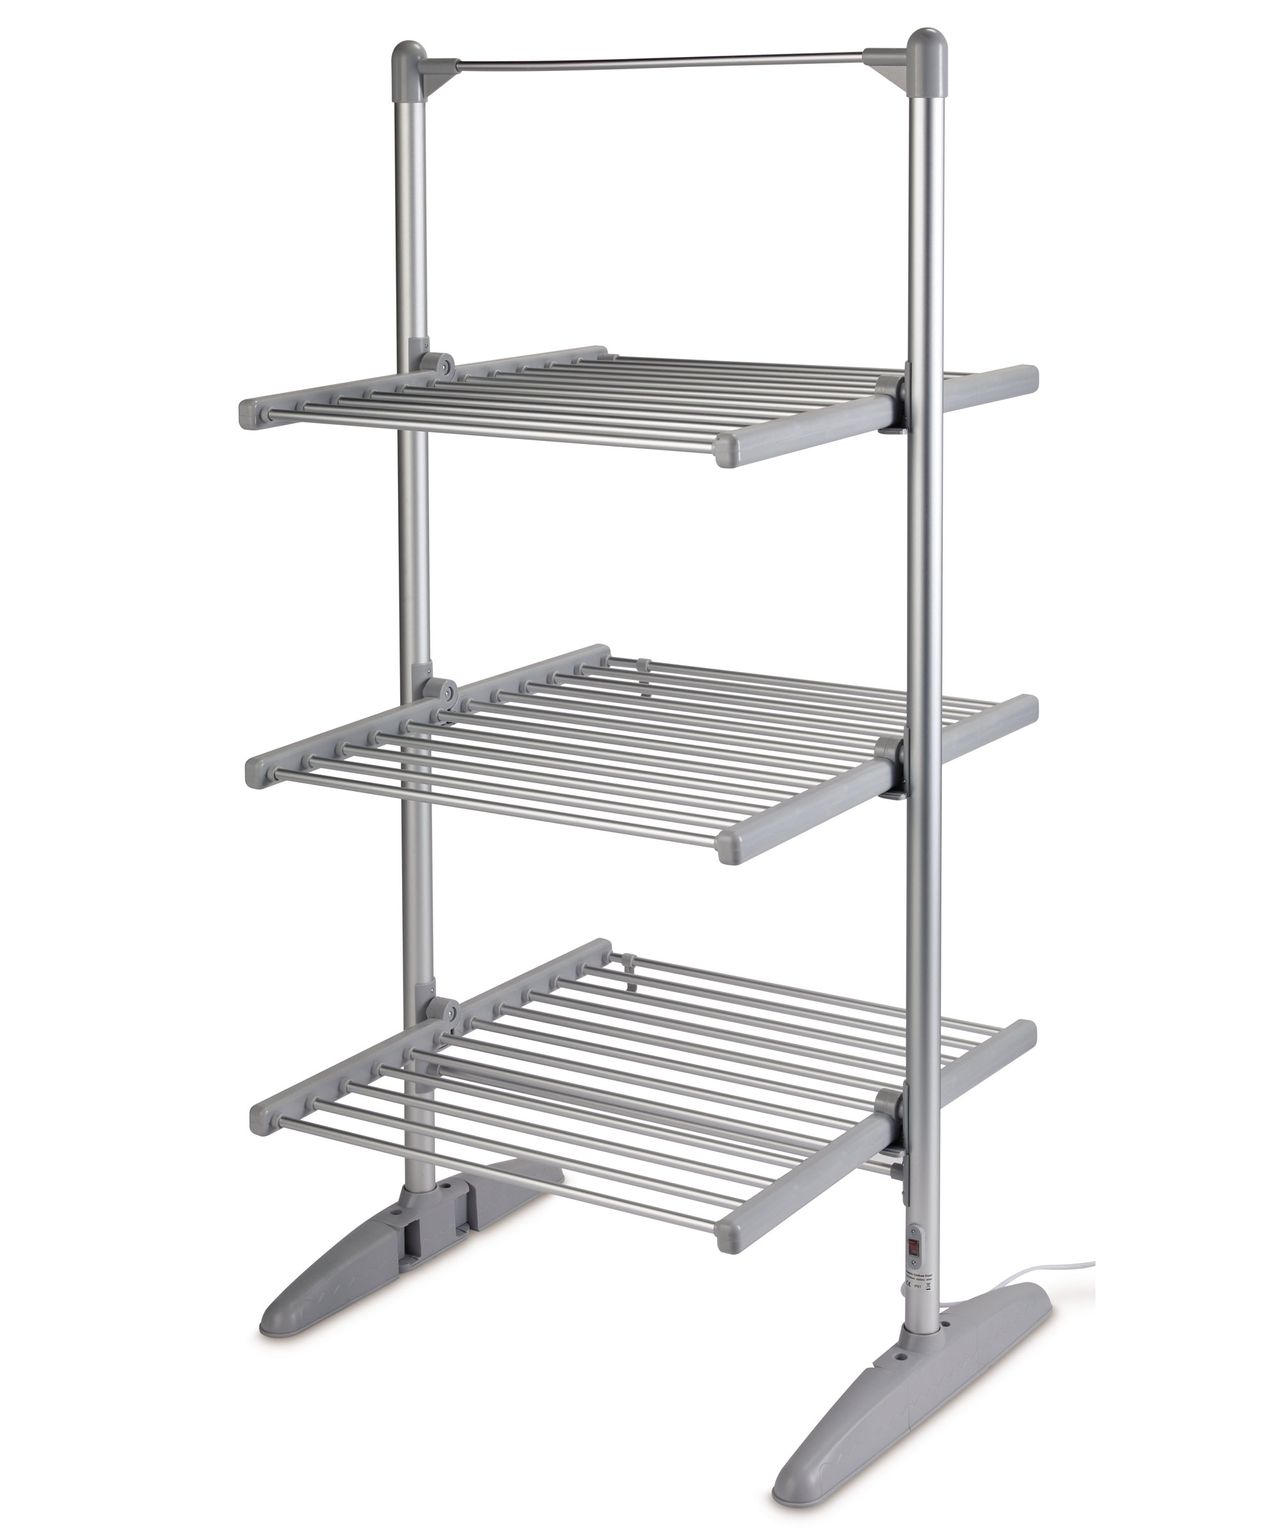 Aldi sell out heated clothes airer is back in stock this weekend